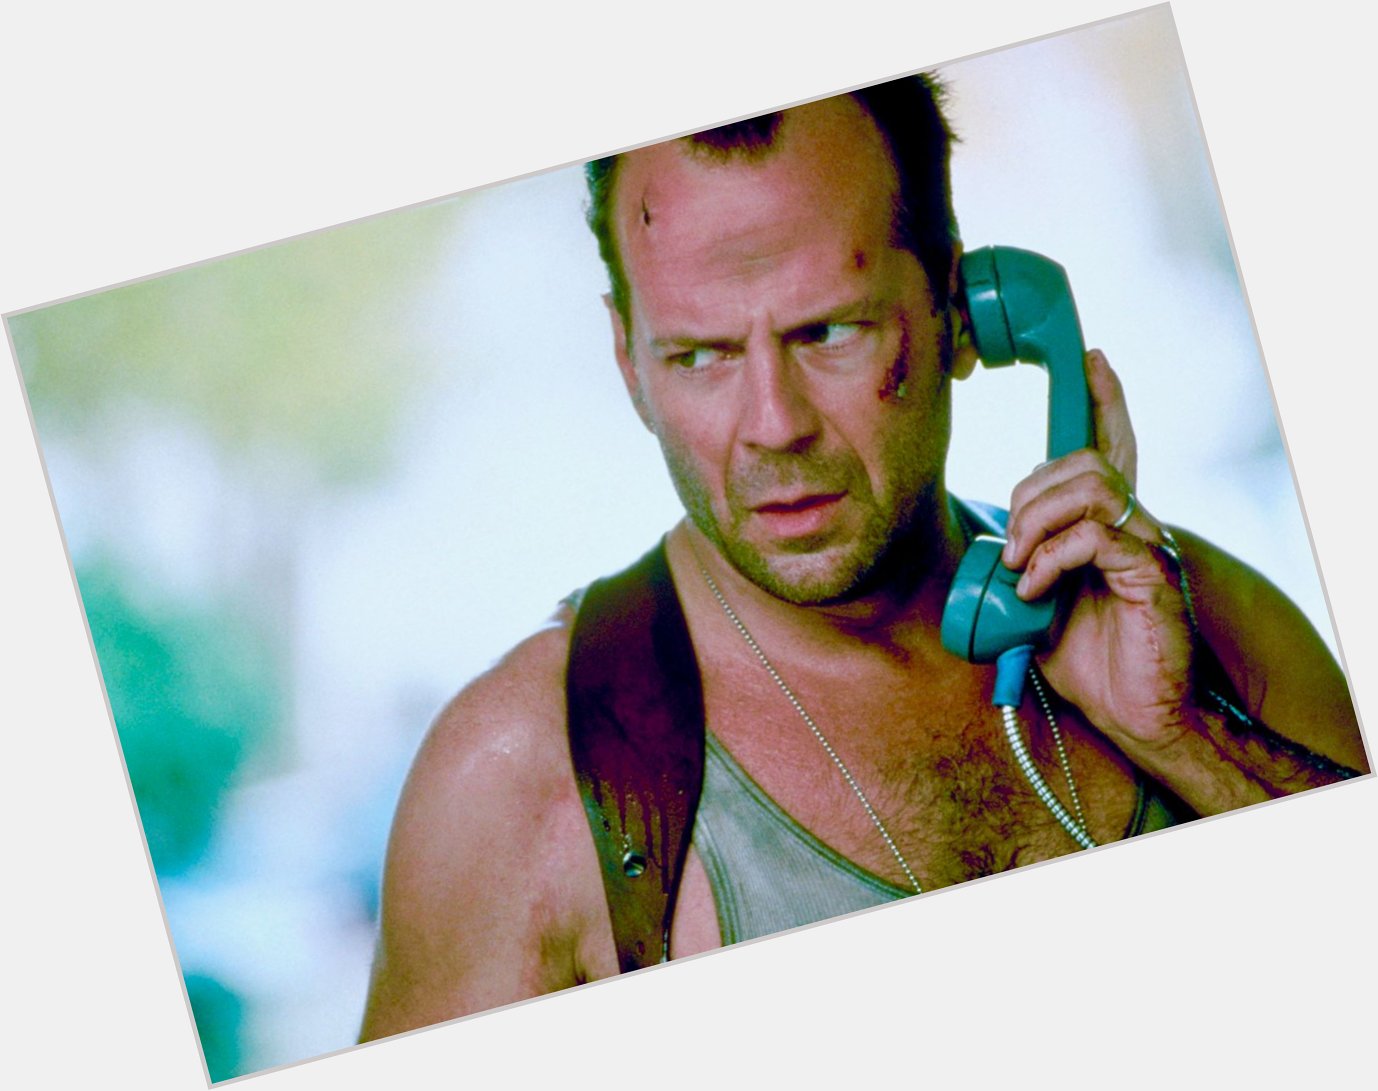 Don\t forget to call Bruce Willis and wish him a happy birthday.   